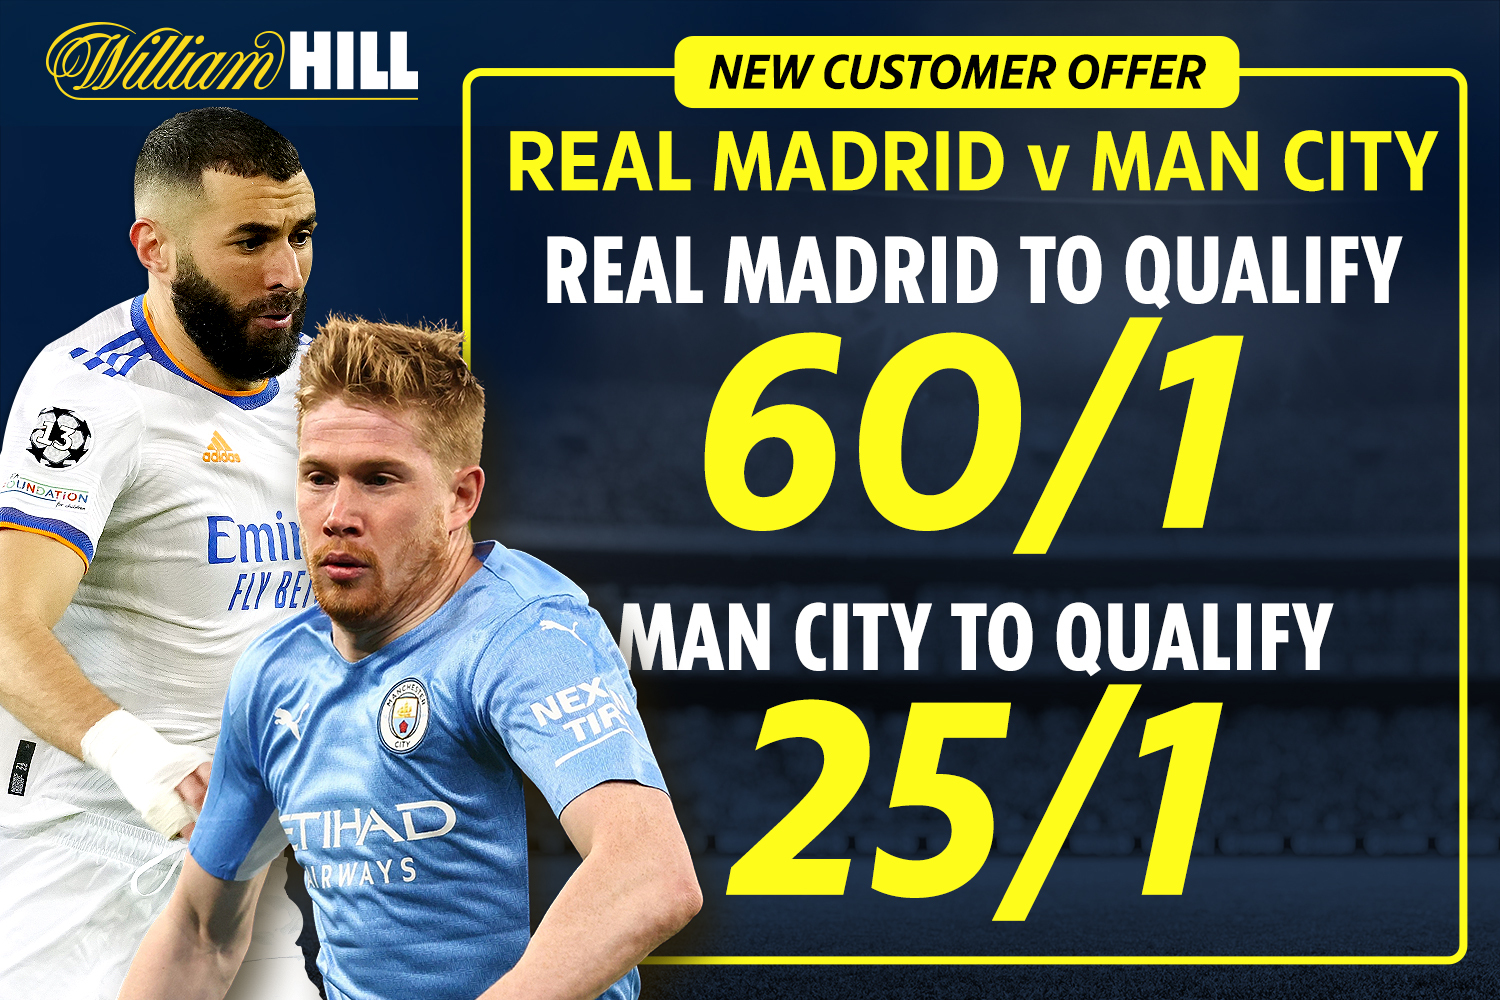 Photo: manchester city vs real madrid odds